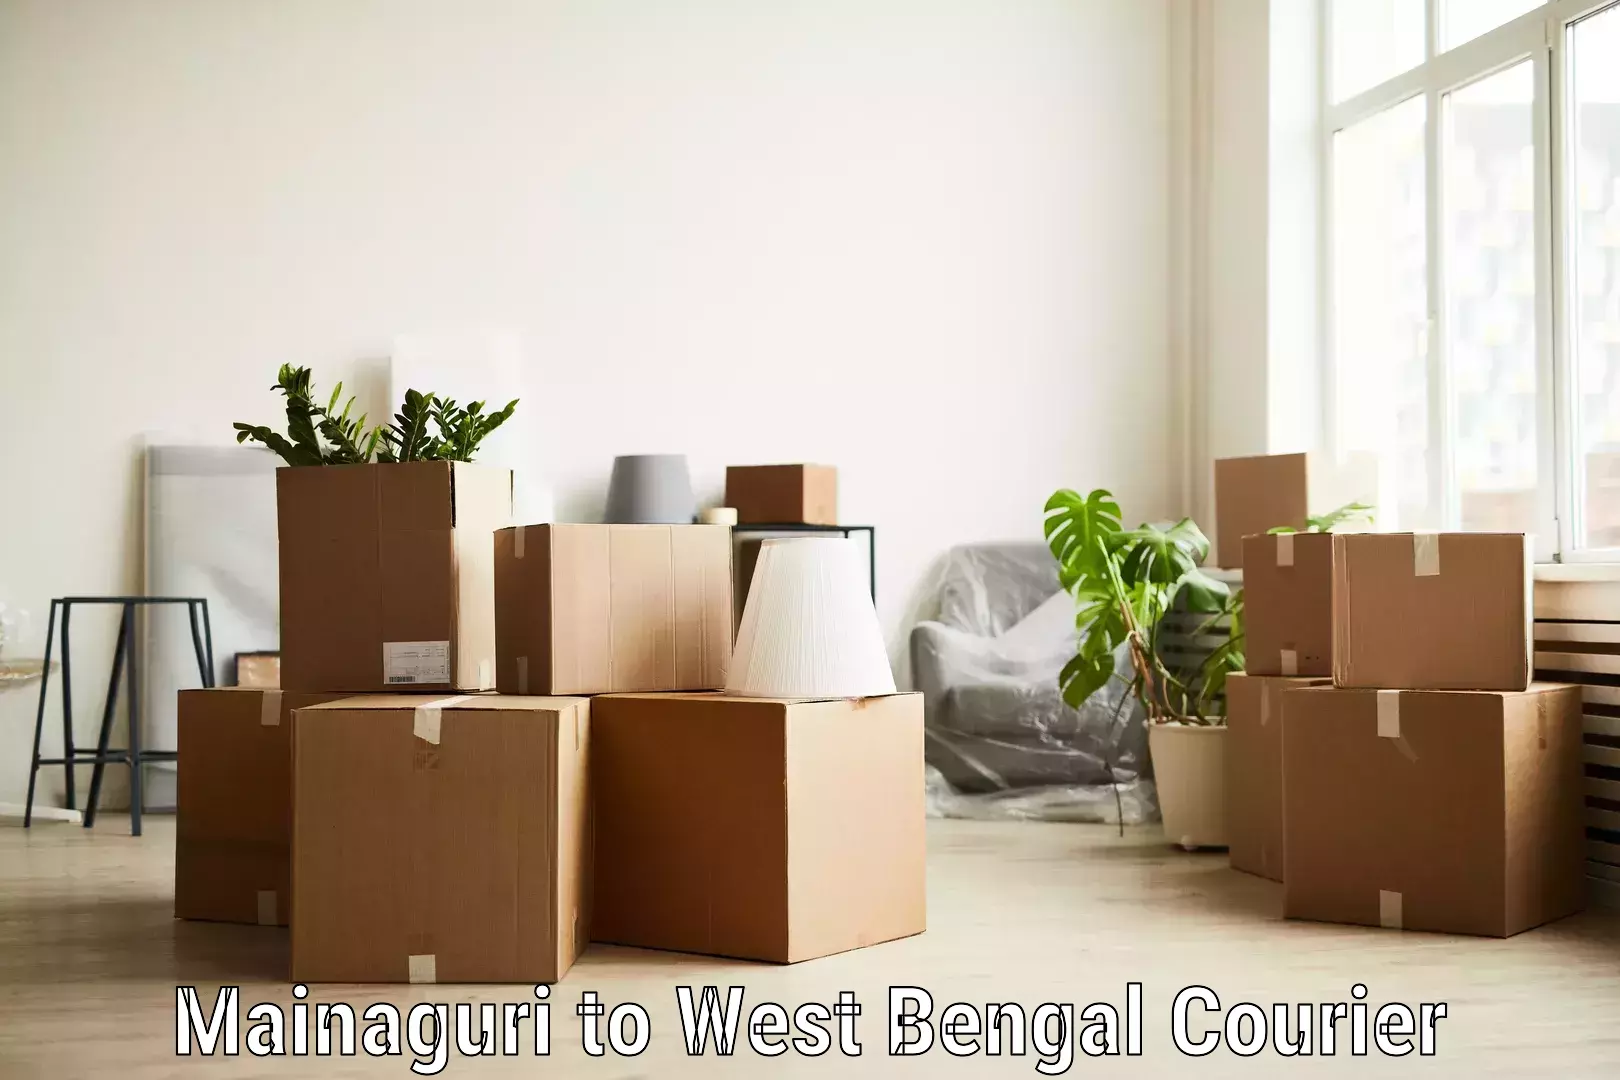 Sustainable delivery practices in Mainaguri to West Bengal